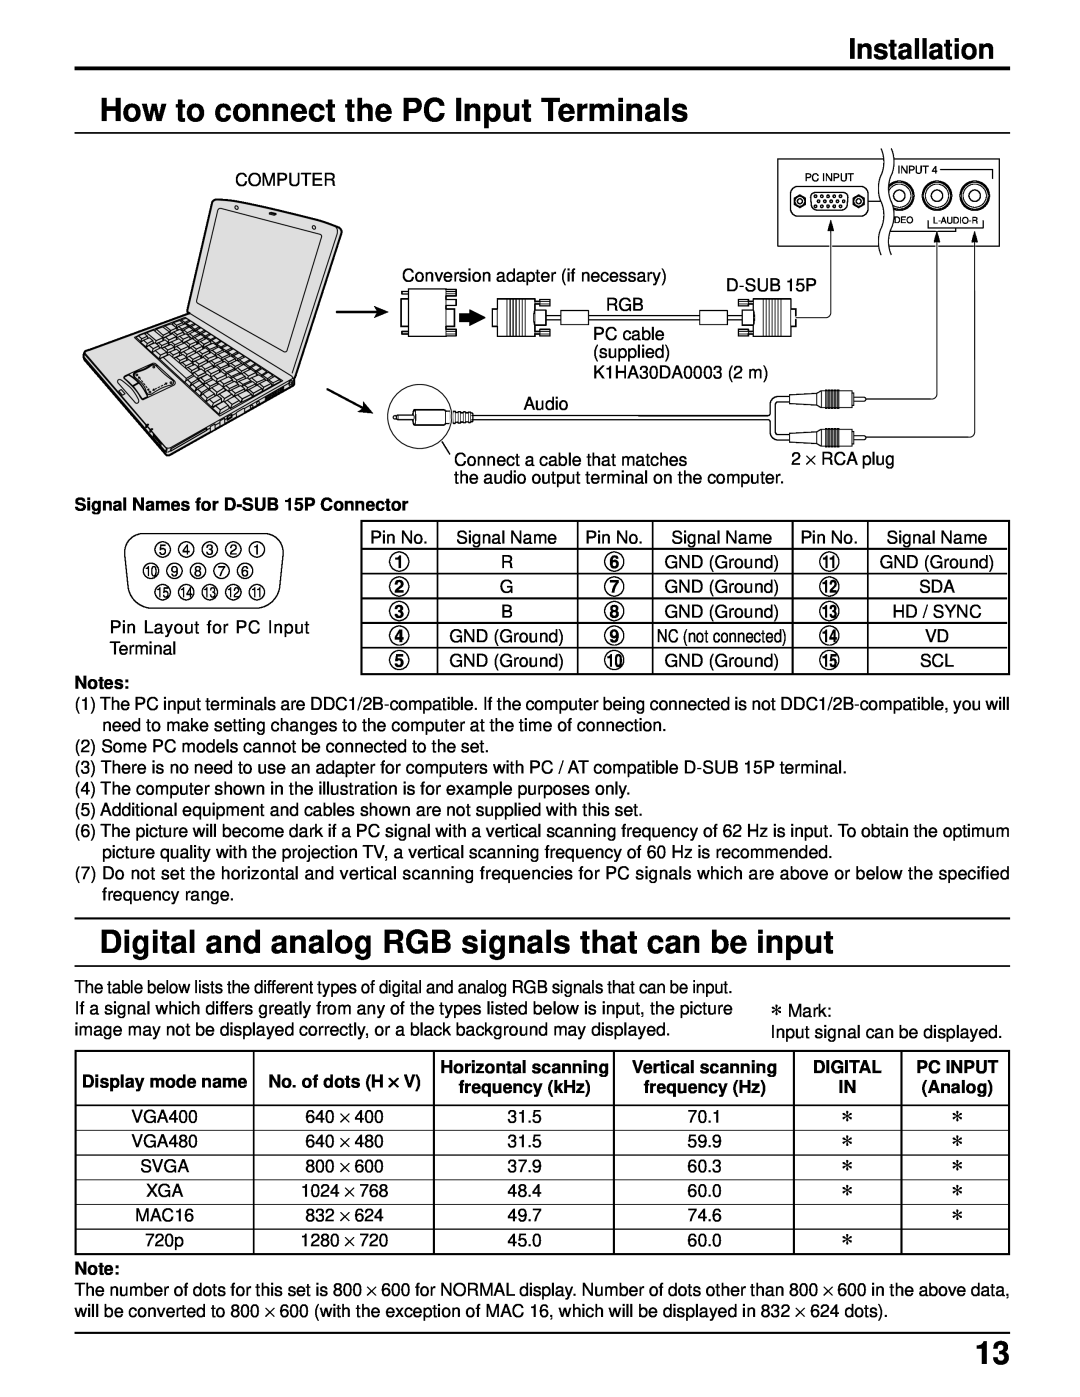 Panasonic PT 52DL52 How to connect the PC Input Terminals, Digital and analog RGB signals that can be input, Installation 